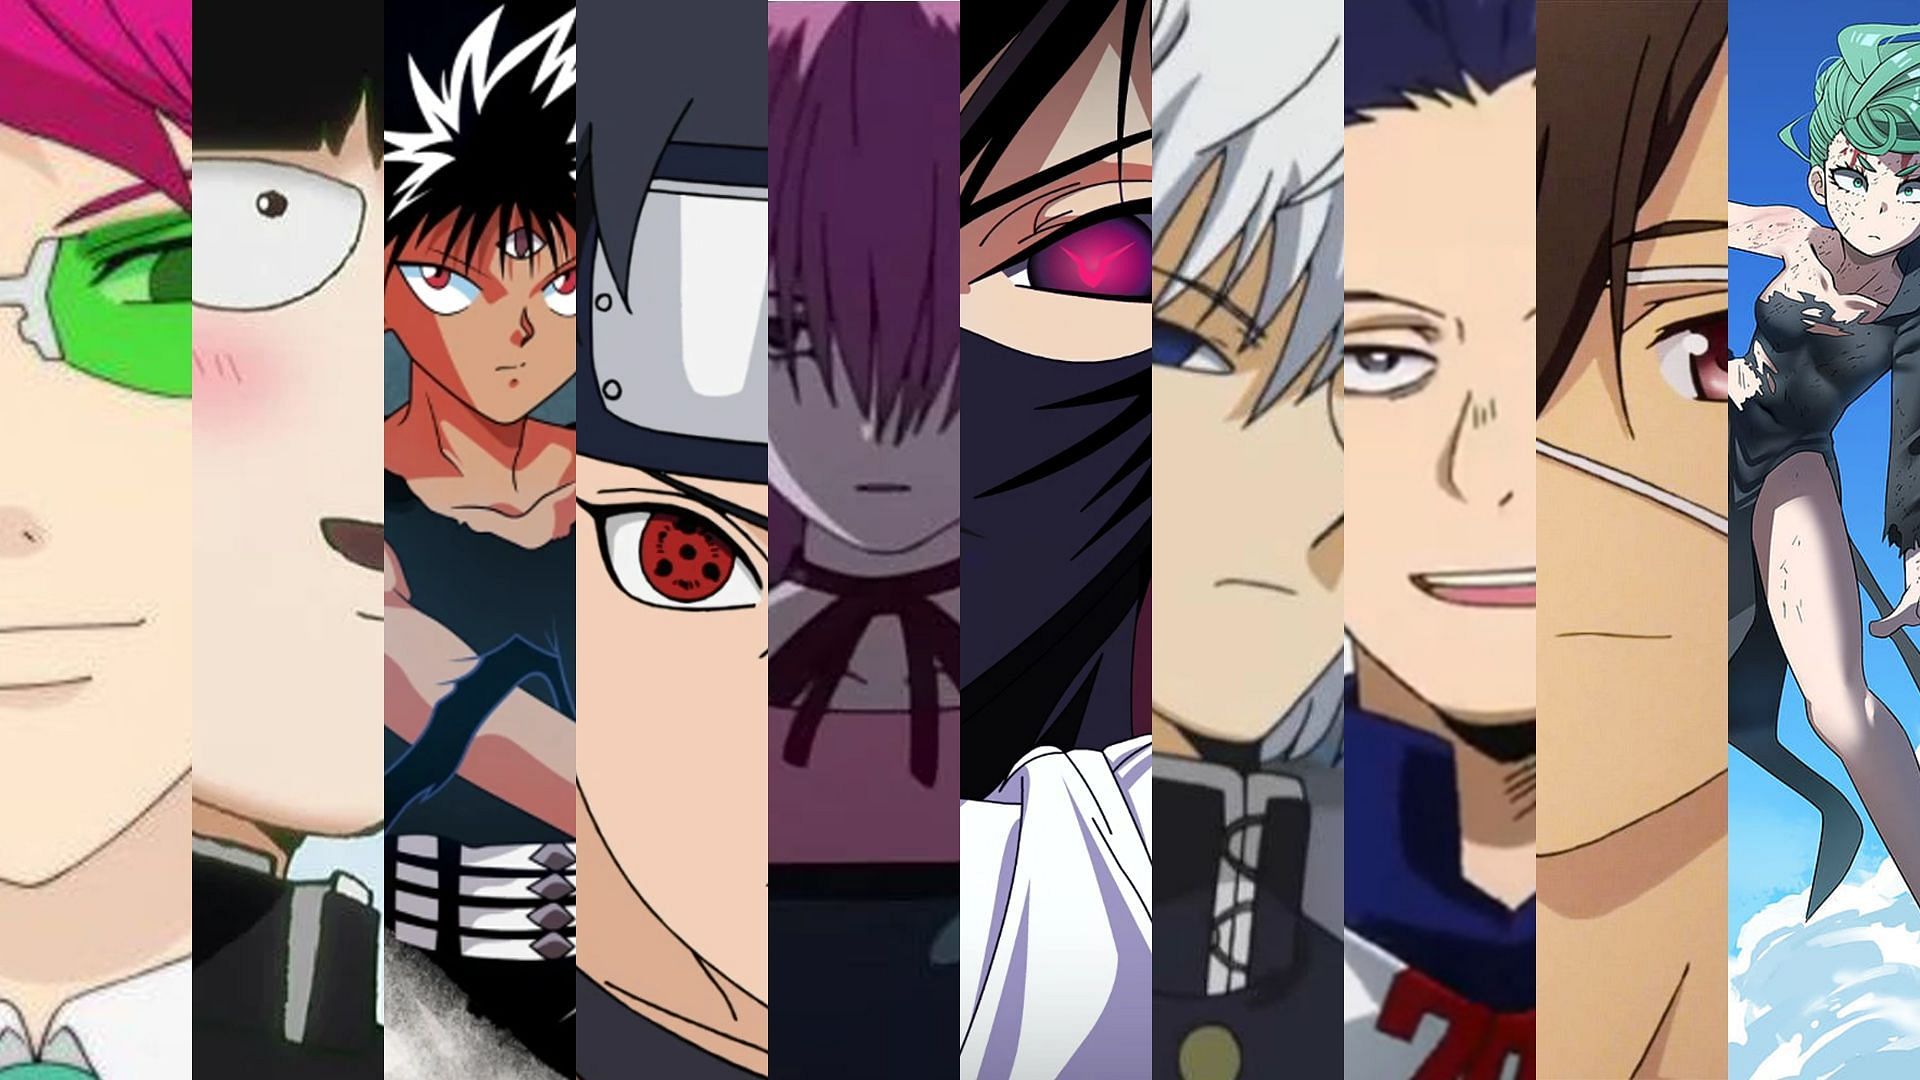 Top 41 Strongest Anime Characters Ranked